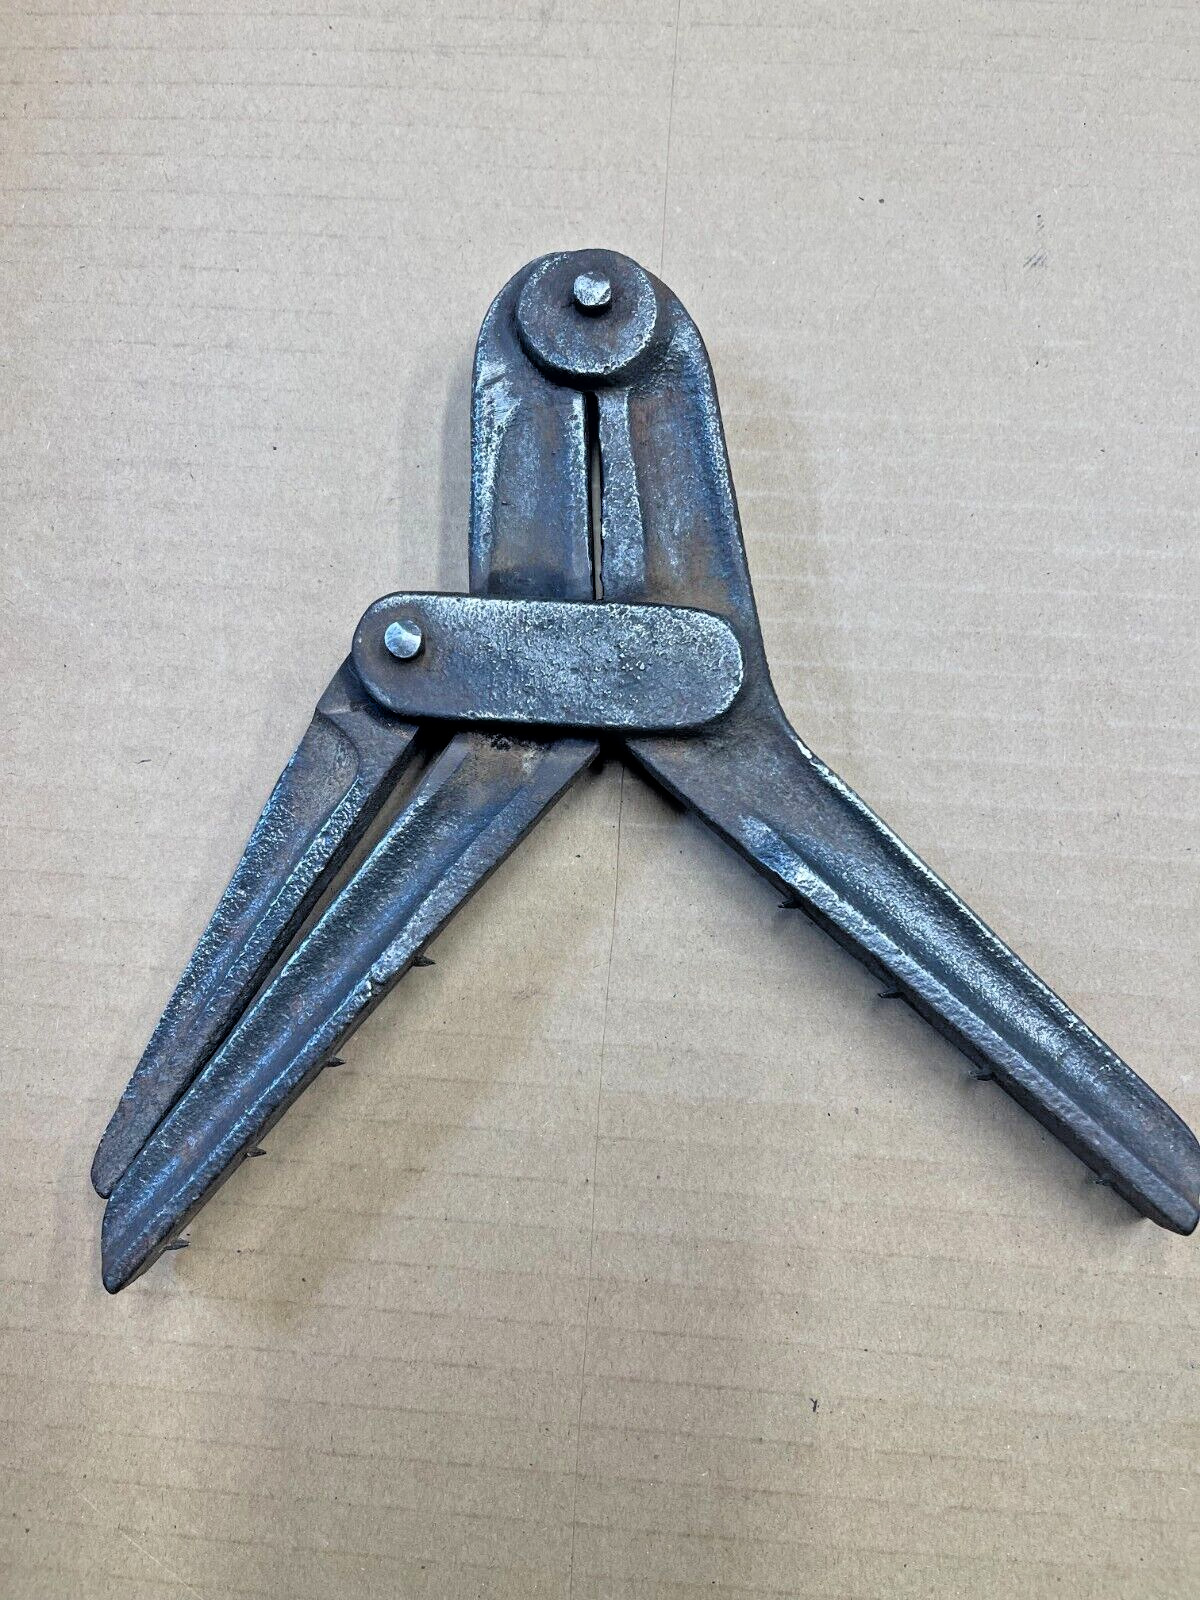 VINTAGE EARLY CORNER MITER CLAMP - VERY GOOD COND